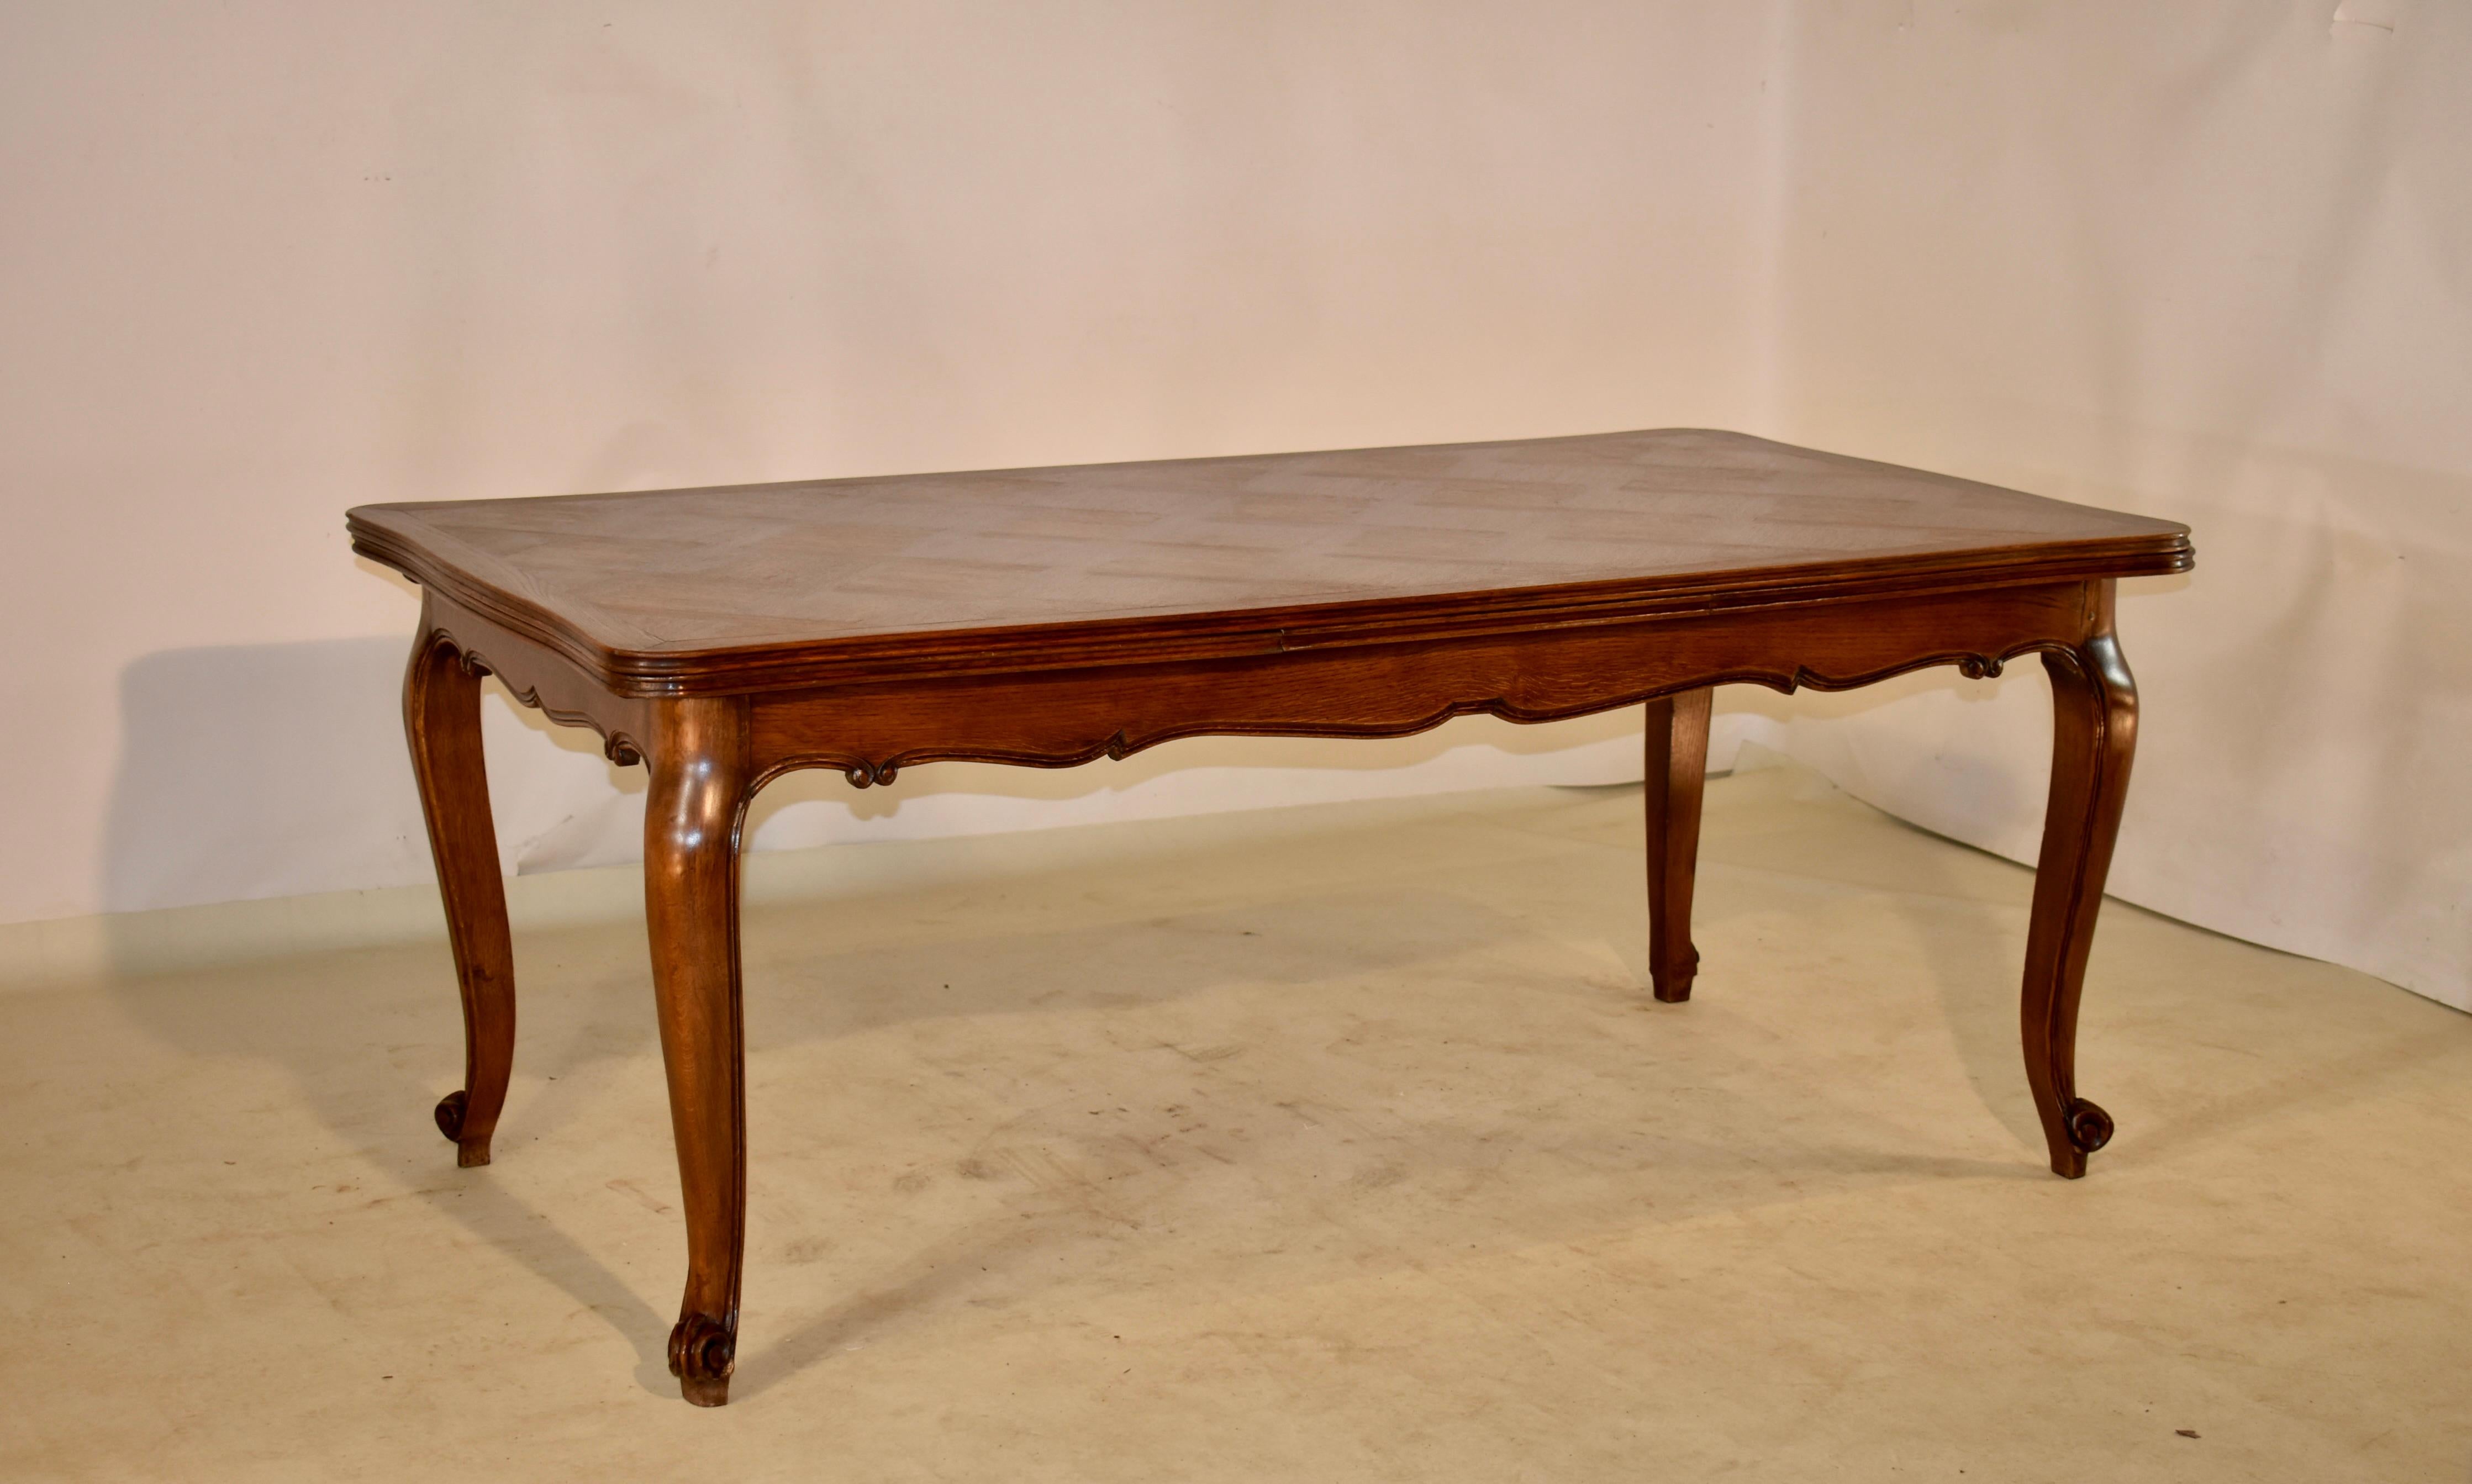 Late 19th century French draw leaf table made from oak with a banded and parqueted top and two extending leaves, following down to a hand scalloped and carved decorated apron and supported on hand carved cabriole legs with carved shell decorations